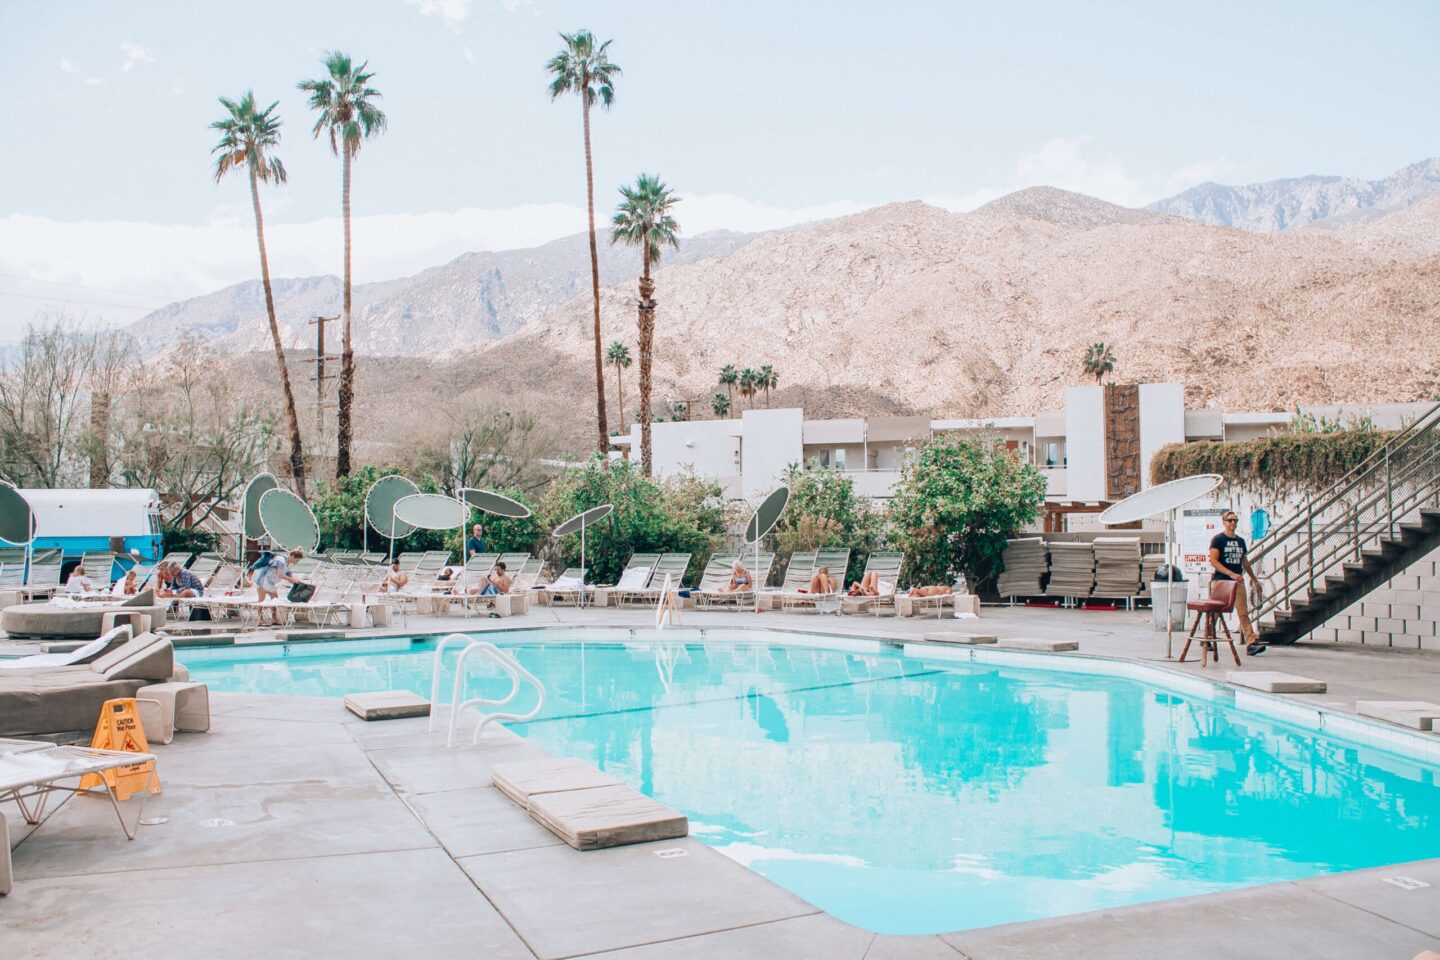 ACE Hotel Pool in Palm Springs